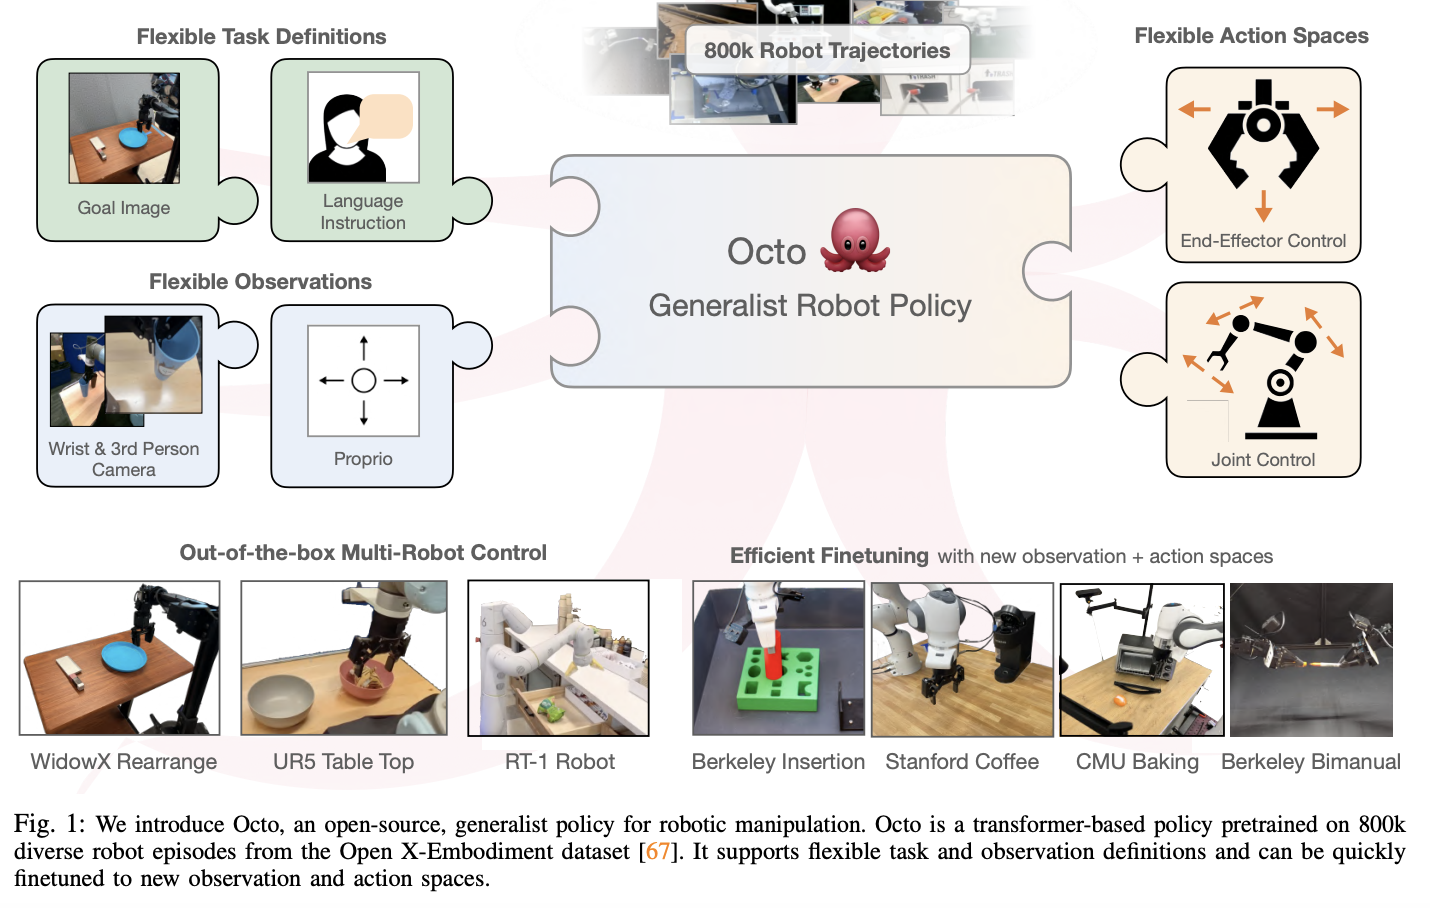  Octo: An Open-Sourced Large Transformer-based Generalist Robot Policy Trained on 800k Trajectories from the Open X-Embodiment Dataset